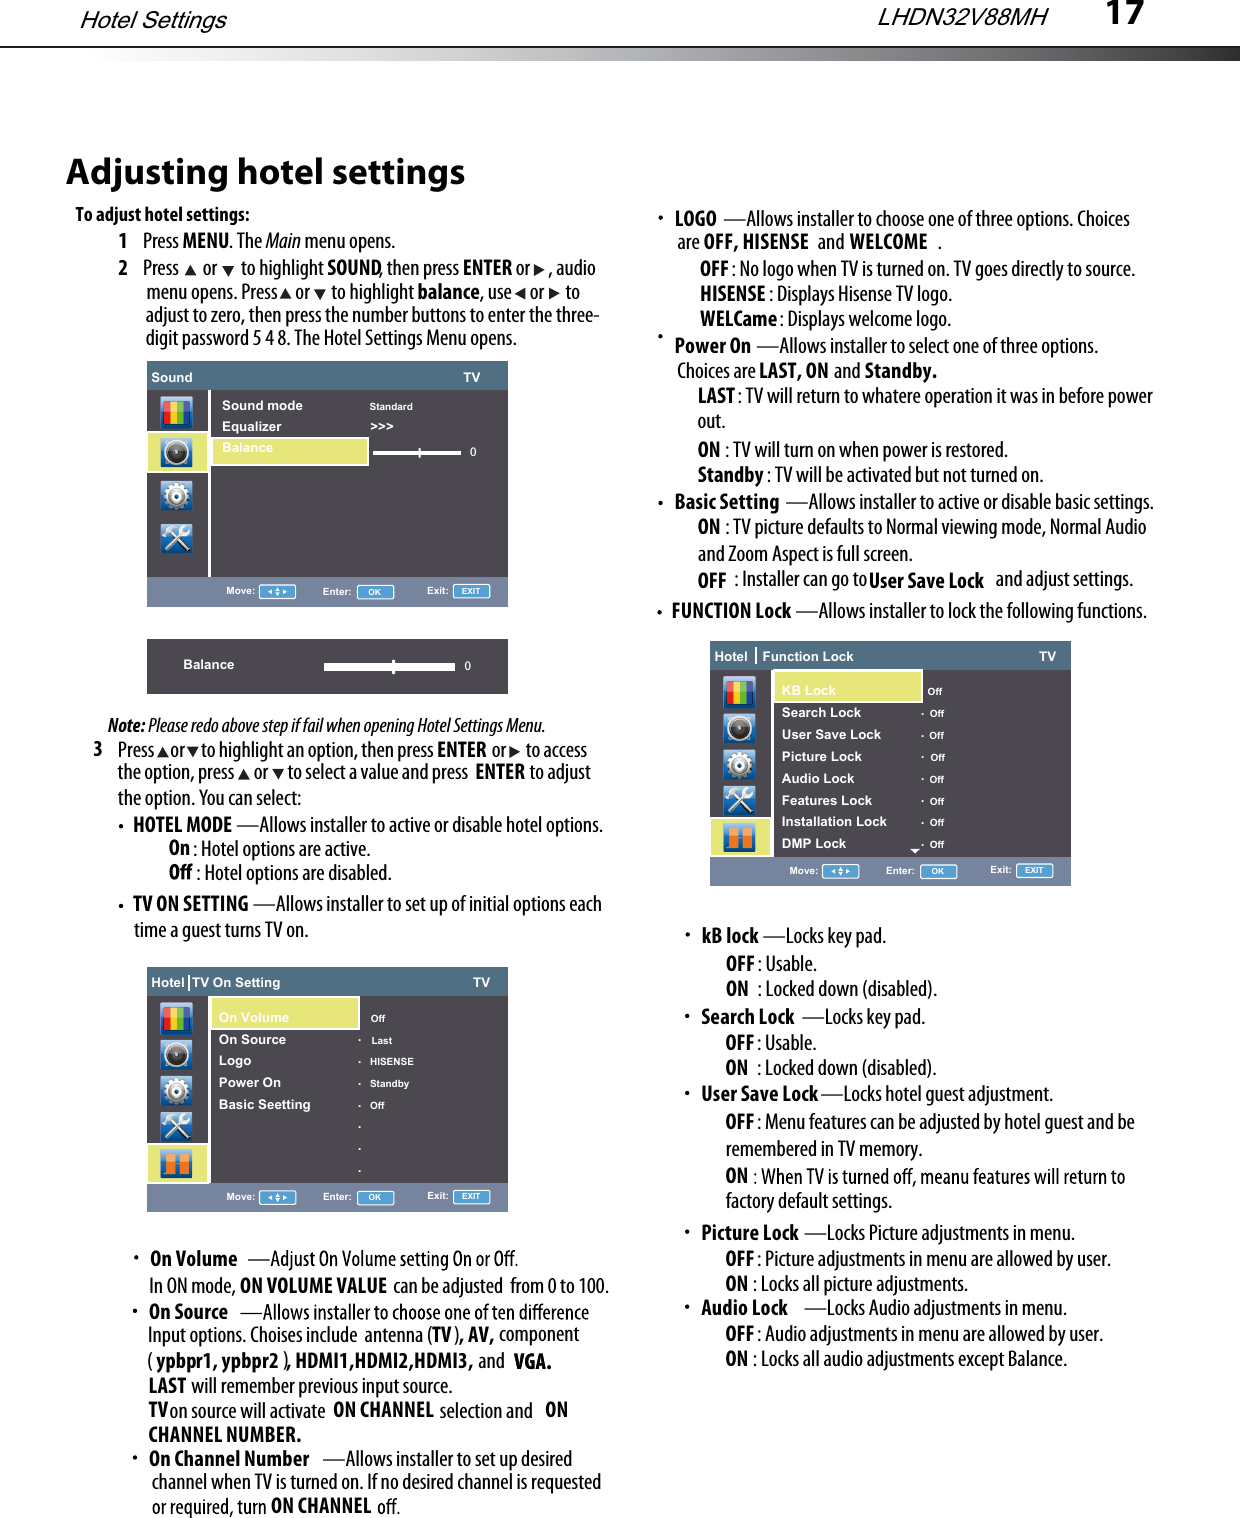 17Adjusting hotel settingsTo adjust hotel settings:1Press MENU. The Main menu opens.2Press   or   to highlight SOUND, then press ENTER or     , audio3HOTEL MODE —Allows installer to active or disable hotel options. TV ON SETTING —Allows installer to set up of initial options eachPress     or     to highlight an option, then press                  or      to accessthe option, press      or      to select a value and press                   to adjustthe option. You can select:ENTER menu opens. Press     or      to highlight balance, use     or      to  adjust to zero, then press the number buttons to enter the three- digit password 5 4 8. The Hotel Settings Menu opens.Note: Please redo above step if fail when opening Hotel Settings Menu.ENTER: Hotel options are active. On: Hotel options are disabled. time a guest turns TV on.On VolumeIn ON mode,                                            can be adjusted  from 0 to 100.ON VOLUME VALUEOn SourceInput options. Choises include  antenna (      )TV  , AV, component                                    )( ypbpr1, ypbpr2  , HDMI1,HDMI2,HDMI3,            VGA.andwill remember previous input source.LAST          VGA.on source will activate                                selection andTV                                              ON CHANNEL                               ON CHANNEL NUMBER.—Allows installer to set up desiredOn Channel Numberchannel when TV is turned on. If no desired channel is requestedON CHANNEL—Allows installer to select one of three options.Power OnChoices are                      andLAST, ON          Standby.: TV will return to whatere operation it was in before powerLAST out.ON : TV will turn on when power is restored.Standby : TV will be activated but not turned on.—Allows installer to active or disable basic settings.Basic SettingON : TV picture defaults to Normal viewing mode, Normal Audio OFF : Installer can go to                                    and adjust settings.and Zoom Aspect is full screen.User Save LockFUNCTION Lock —Allows installer to lock the following functions.—Locks key pad.kB lockOFF: Usable.ON : Locked down (disabled).—Locks key pad.Search Lock OFF: Usable.ON : Locked down (disabled).—Locks hotel guest adjustment.User Save Lock OFF: Menu features can be adjusted by hotel guest and be ONremembered in TV memory.factory default settings.LHDN32V88MHHotel SettingsSound                                                                         TV0Move: Enter:      OK Exit:     EXITSound mode                  StandardEqualizer                        &gt;&gt;&gt;BalanceBalance 0Hotel  TV On Setting                                                    TVMove: Enter:      OK Exit:     EXITOn Volume                      OffOn Source                       LastLogo                                HISENSEPower On                        StandbyBasic Seetting                Off.......Hotel    Function Lock                                                  TVMove: Enter:      OK Exit:     EXIT                                          OffSearch Lock                   OffUser Save Lock             OffPicture Lock                   OffAudio Lock                     OffFeatures Lock                OffInstallation Lock            OffDMP Lock                       Off.......Hotel    Function Lock                                                  TVMove: Enter:      OK Exit:     EXITKB Lock                           OffSearch Lock                   OffUser Save Lock             OffPicture Lock                   OffAudio Lock                     OffFeatures Lock                OffInstallation Lock            OffDMP Lock                       Off.......—Locks Picture adjustments in menu.Picture LockOFF: Picture adjustments in menu are allowed by user.ON : Locks all picture adjustments.—Locks Audio adjustments in menu.Audio LockOFF: Audio adjustments in menu are allowed by user.ON : Locks all audio adjustments except Balance.—Allows installer to choose one of three options. ChoicesLOGOare                                 and                          .: No logo when TV is turned on. TV goes directly to source.OFF: Displays Hisense TV logo.HISENSE: Displays welcome logo.WELCameOFF, HISENSE WELCOME